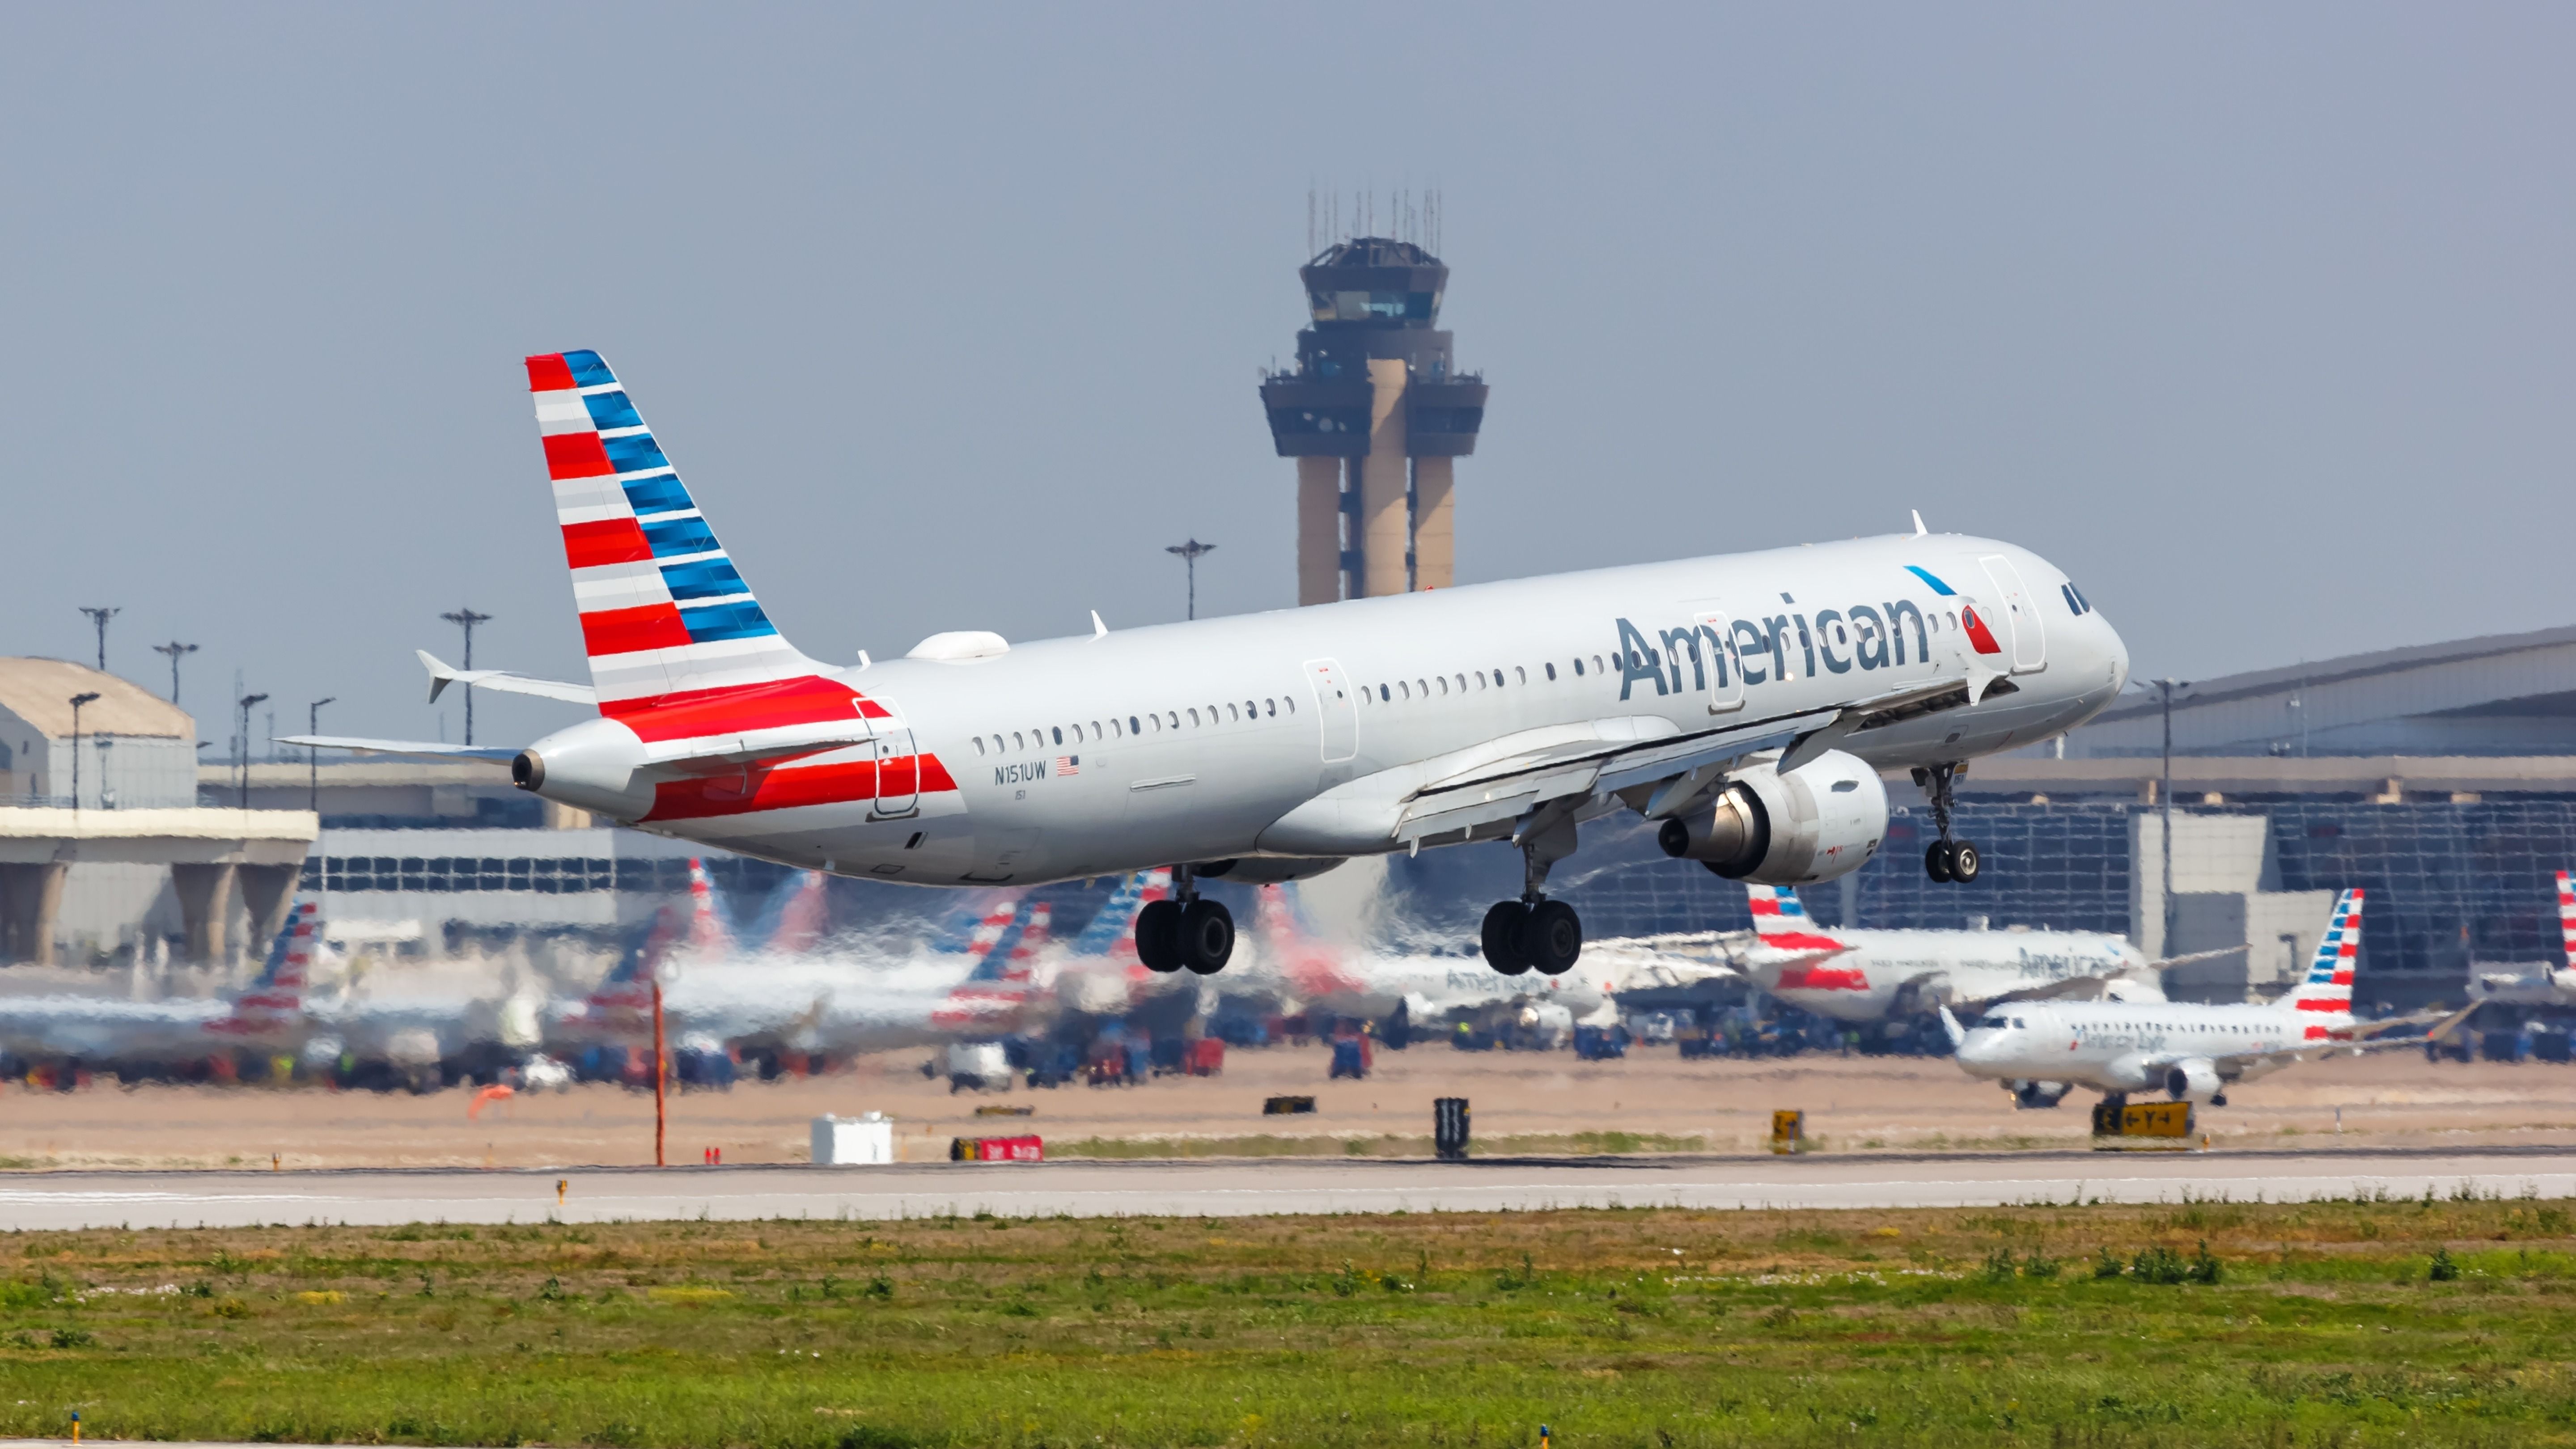 Pilot Union Discloses Problematic Safety And Maintenance Trends At American Airlines